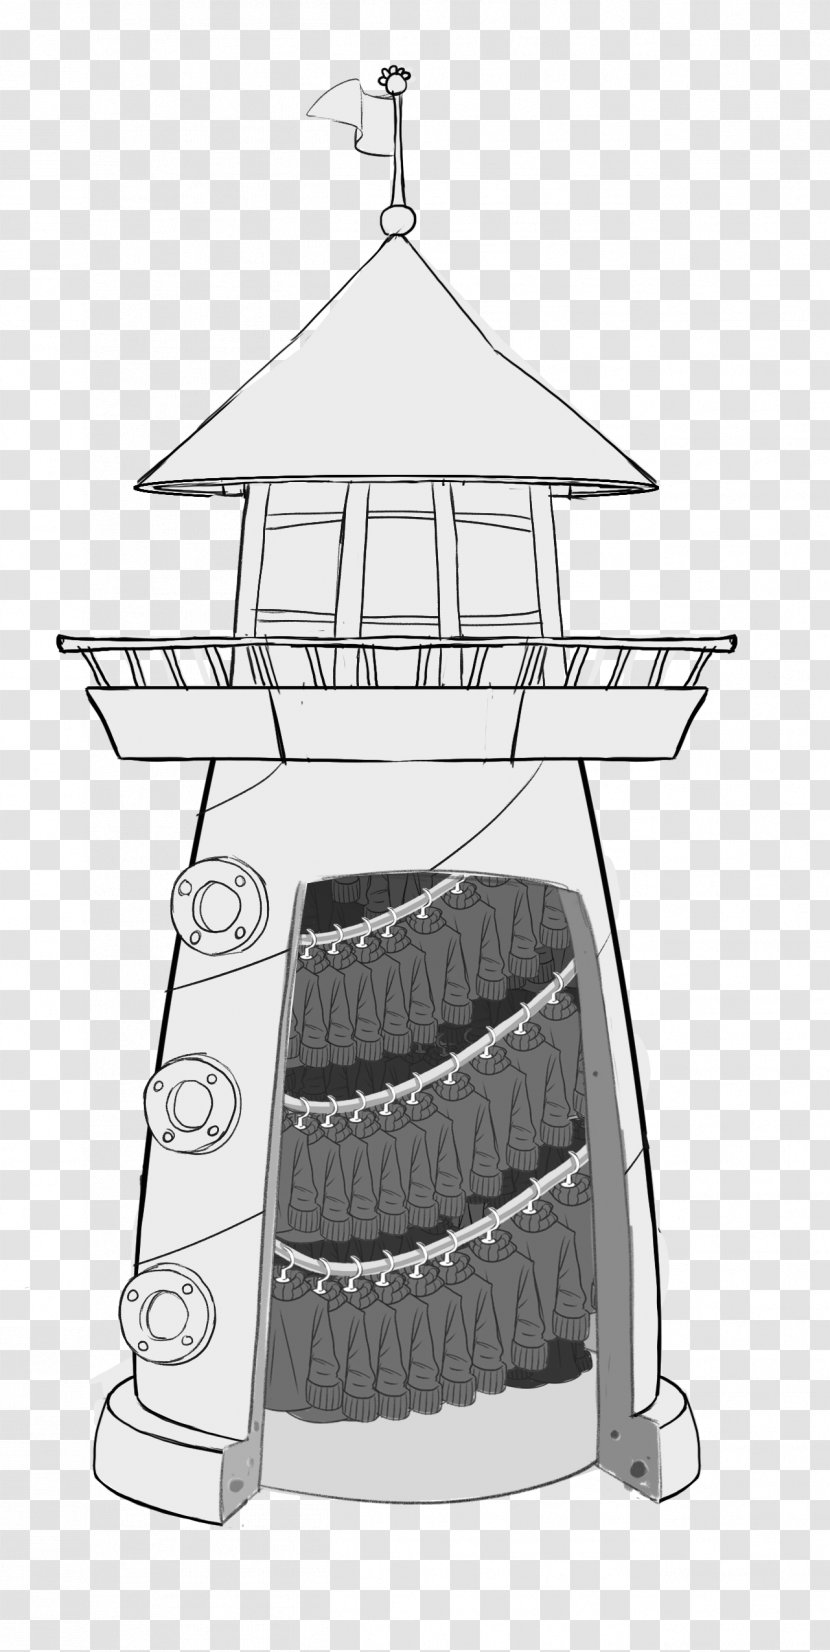 Drawing Line - White - Lighthouse Drawn Transparent PNG